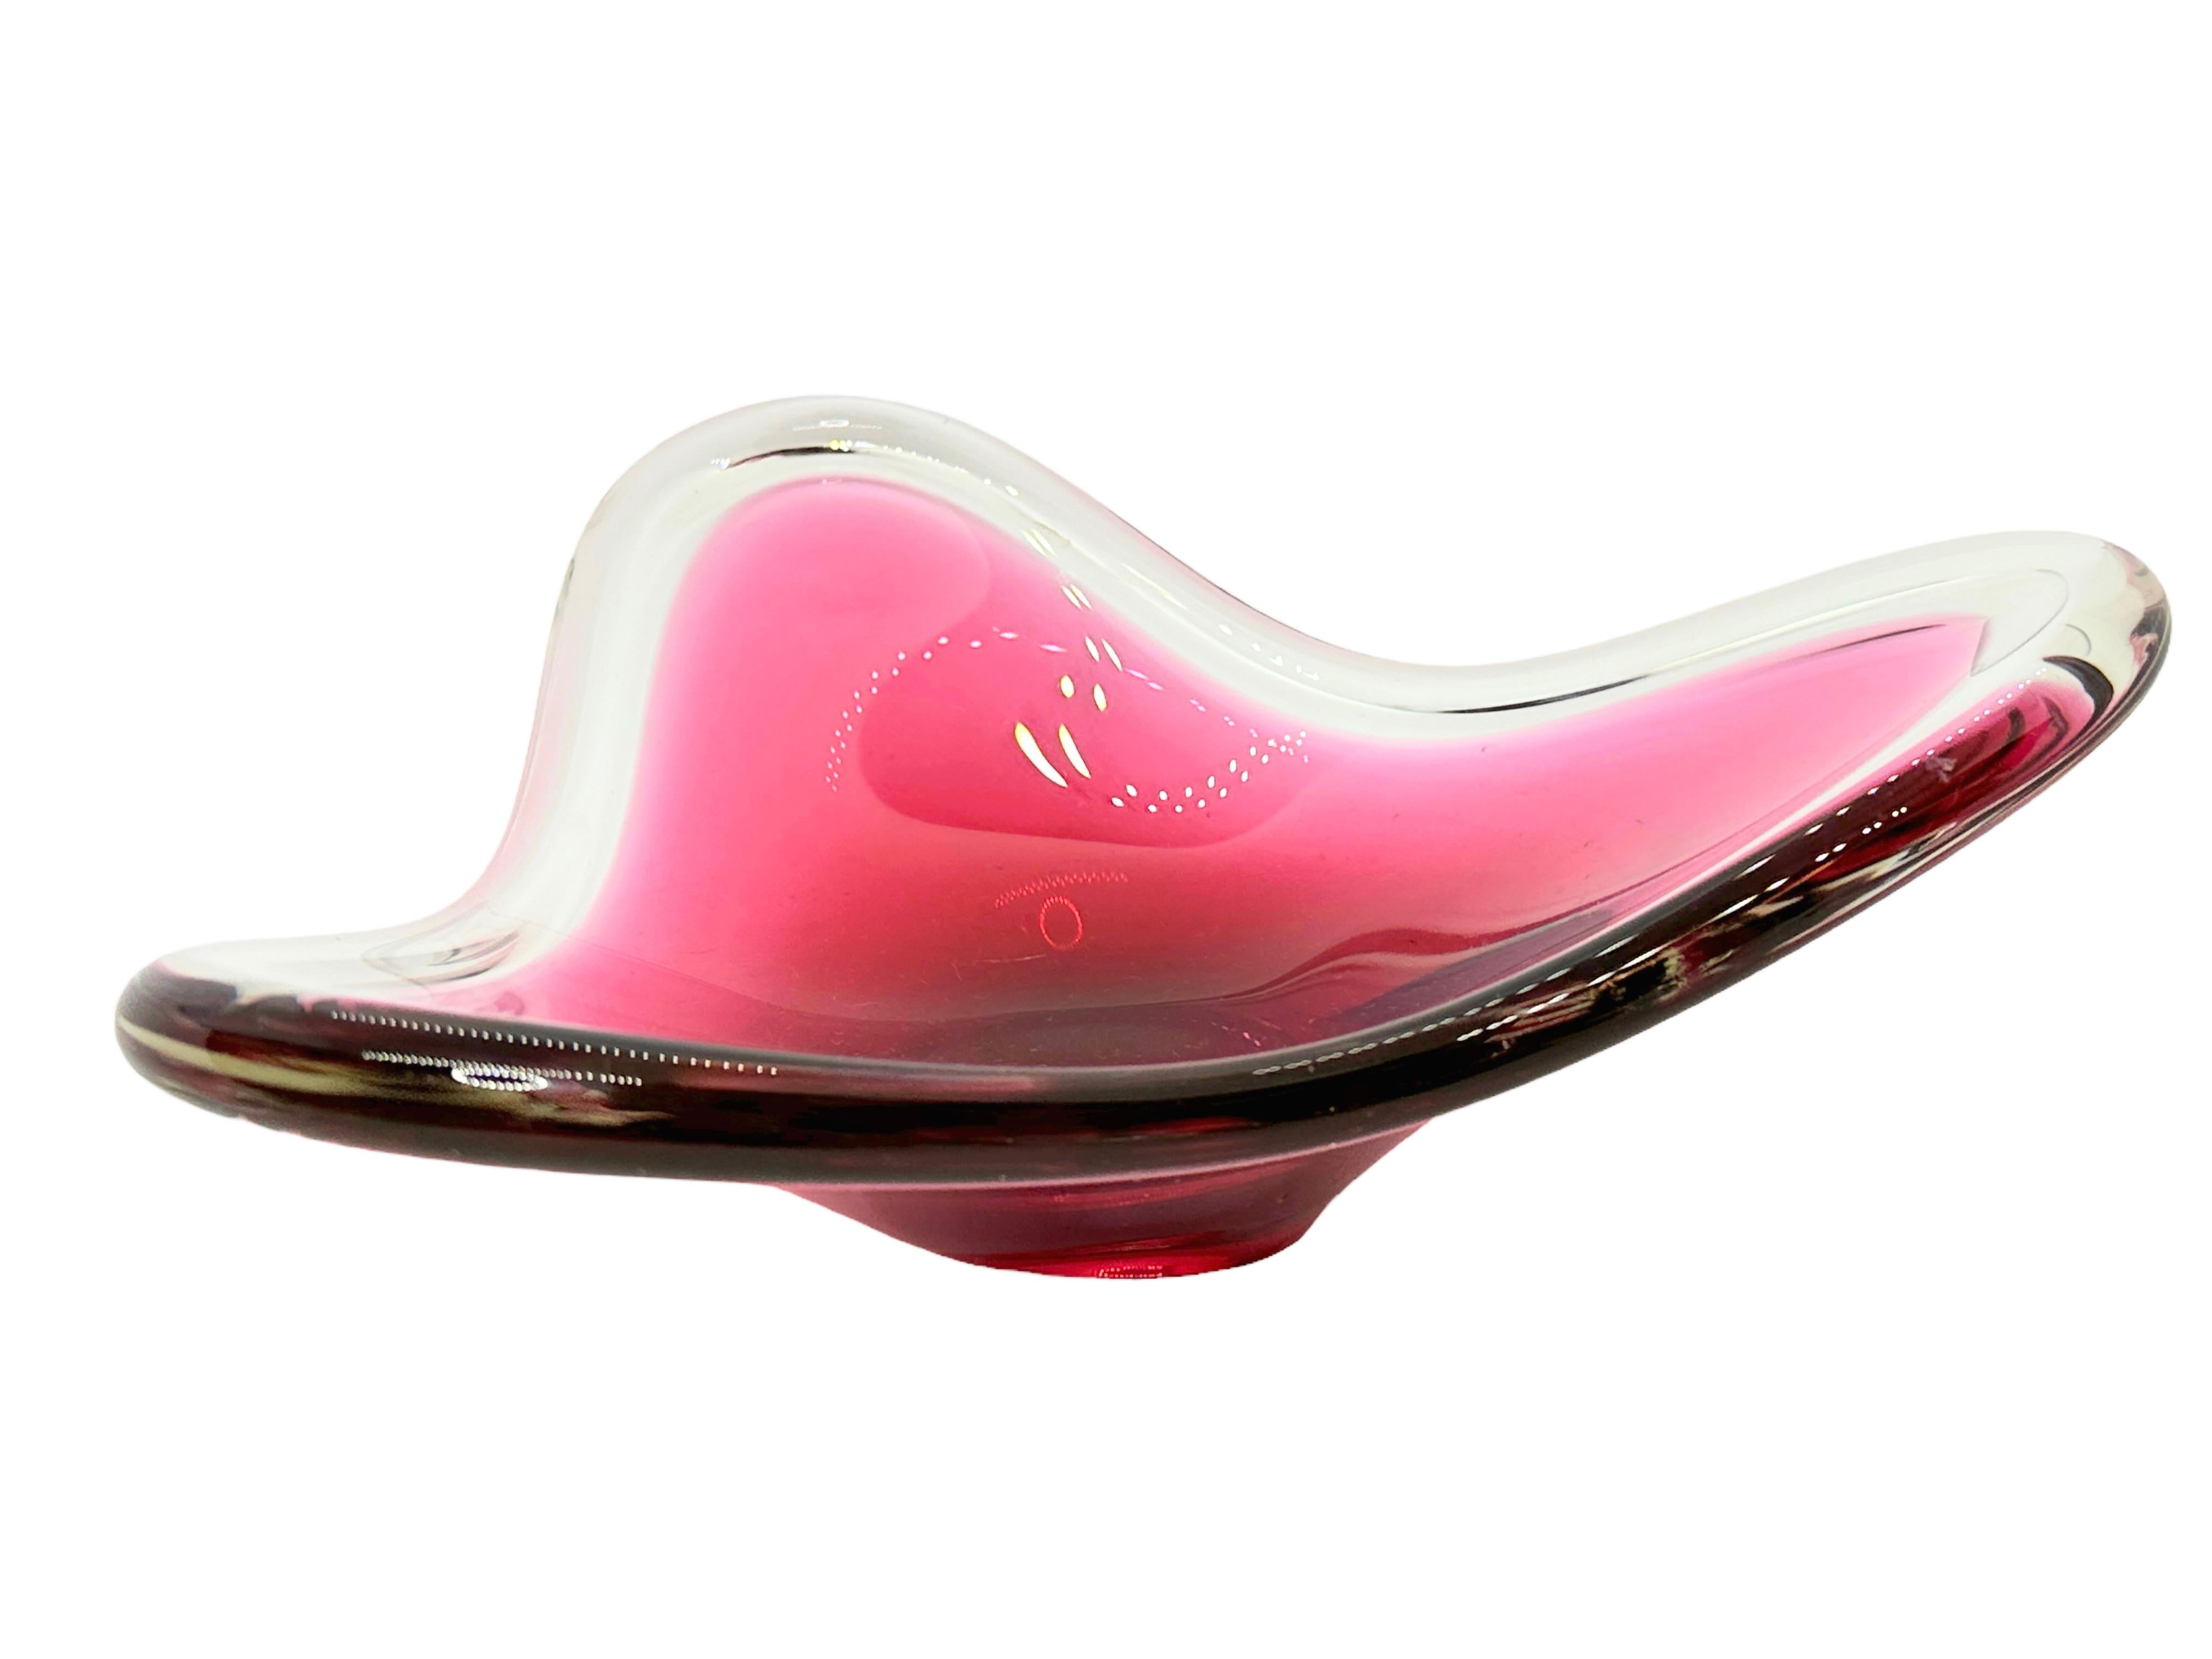 Gorgeous hand blown Murano art glass piece with Sommerso and bullicante techniques. A beautiful organic shaped bowl, catchall or centrepiece, Venice, Murano, Italy, 1970s. Colors are pink and clear. A nice addition to any room. Found at an Estate